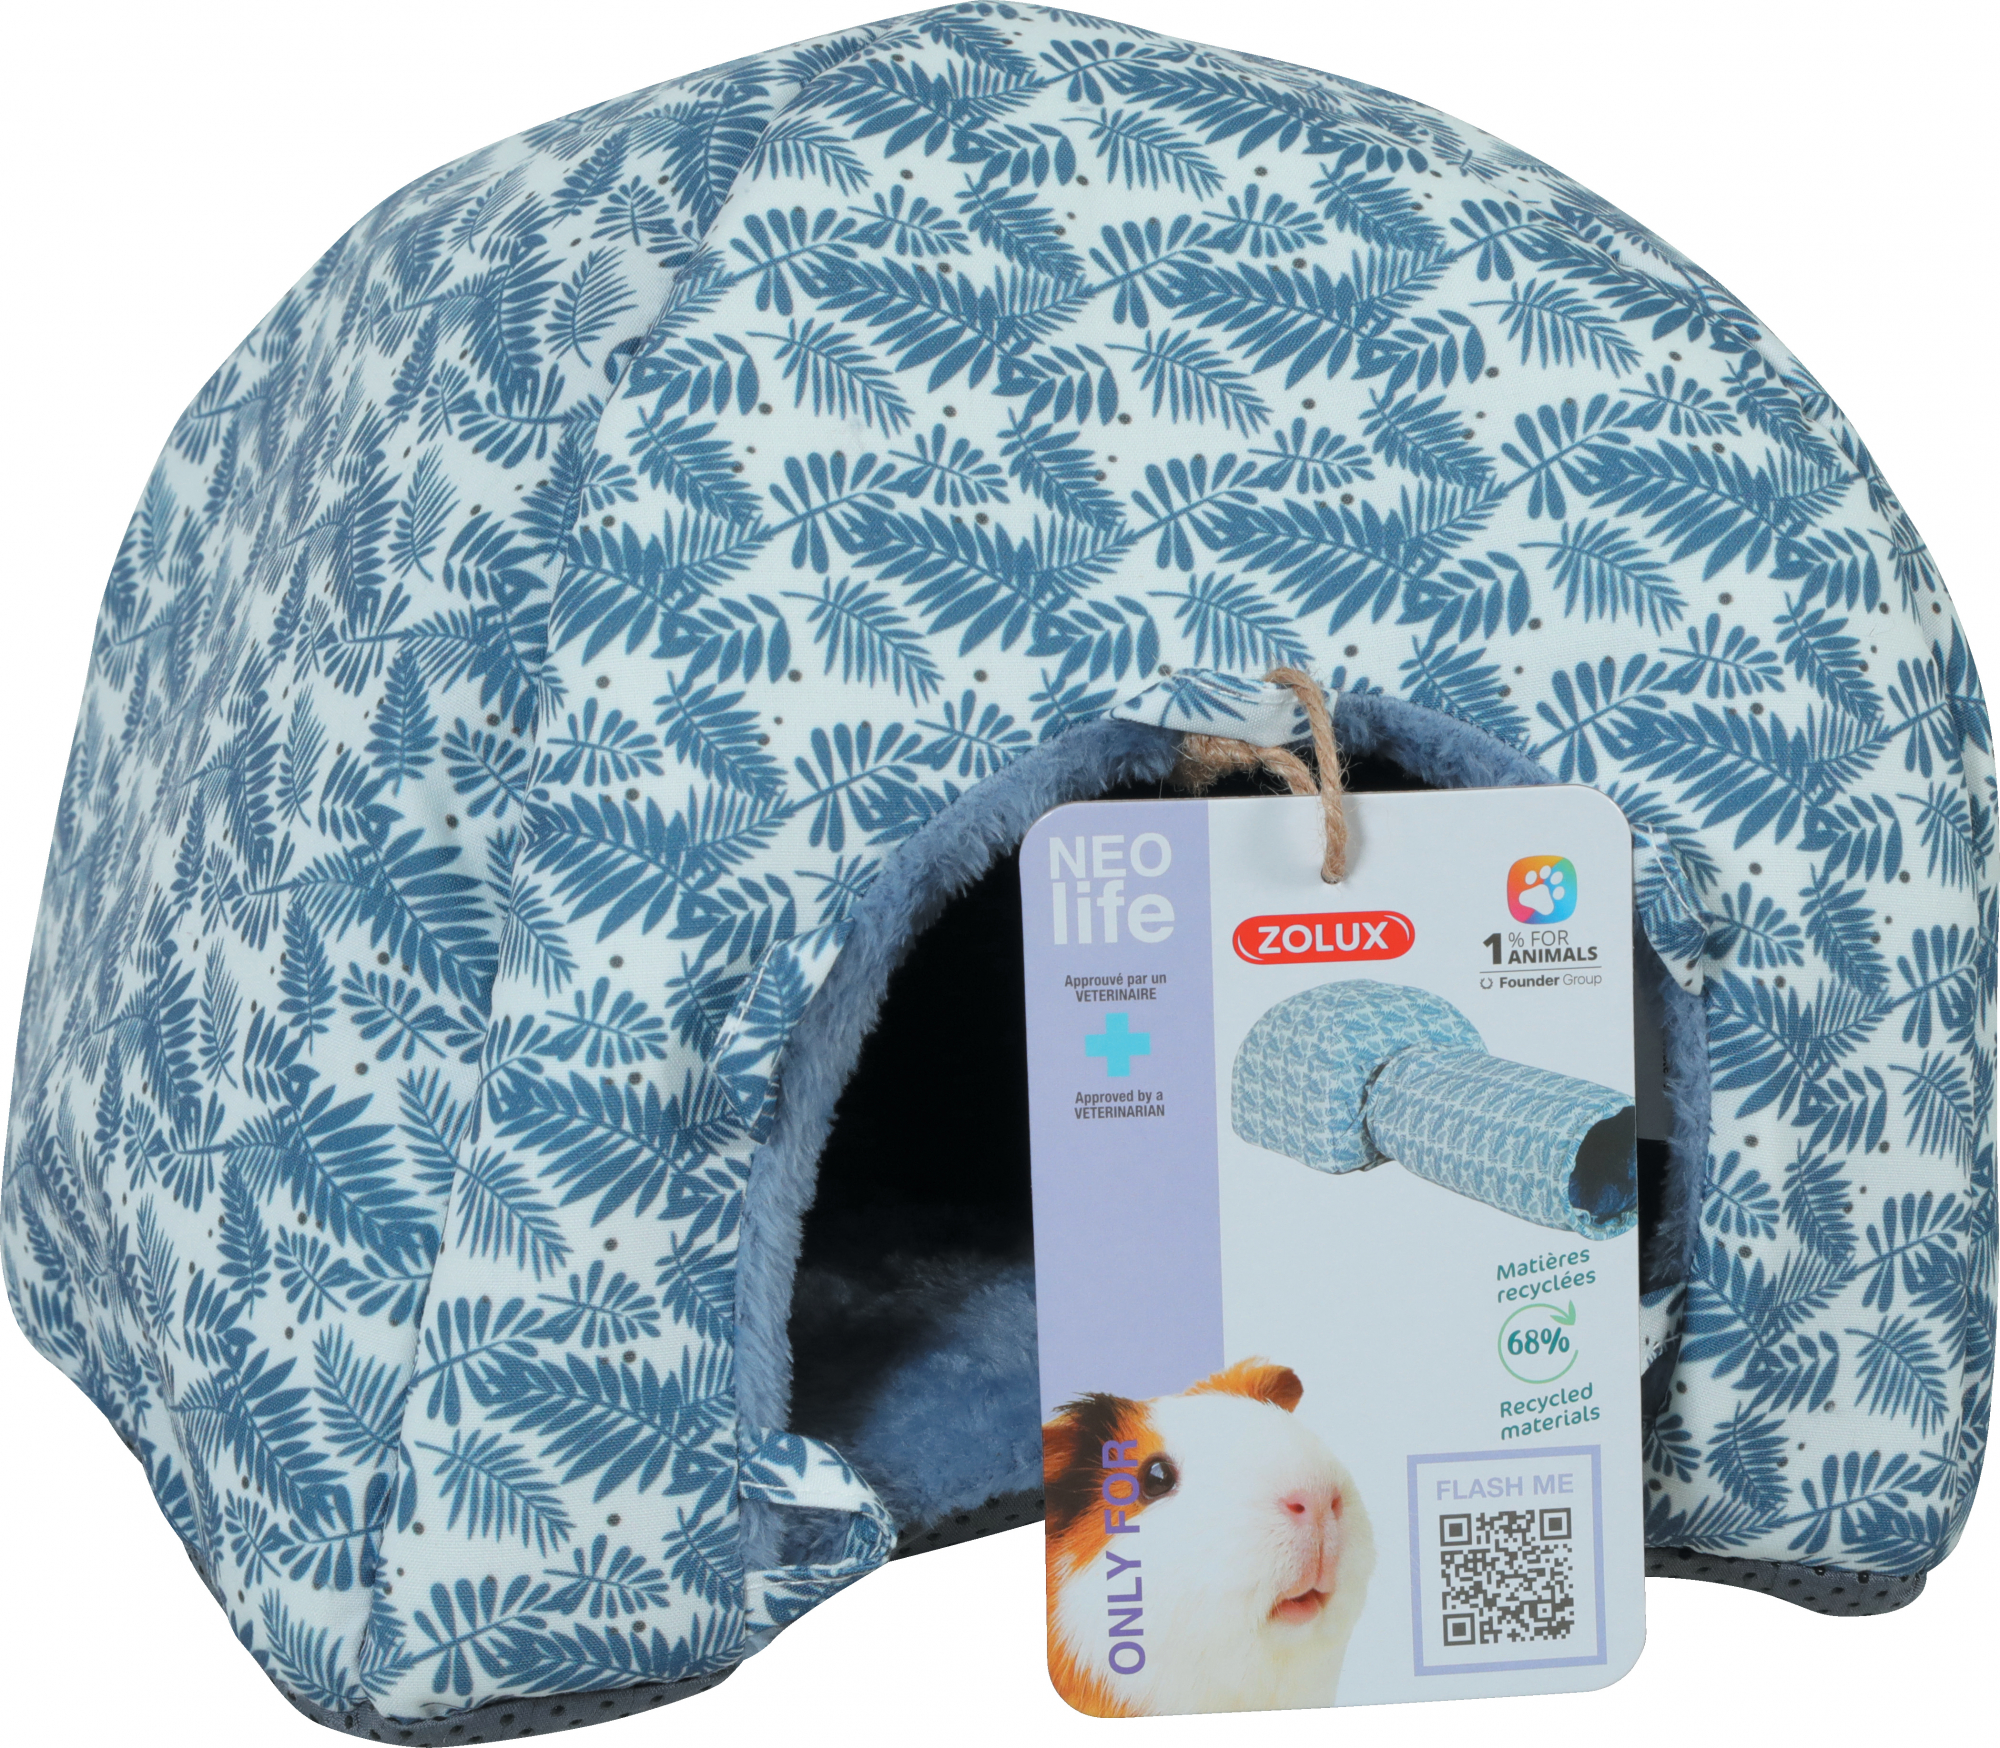 Niche igloo Zolux NEOLIFE pour cochon d'inde